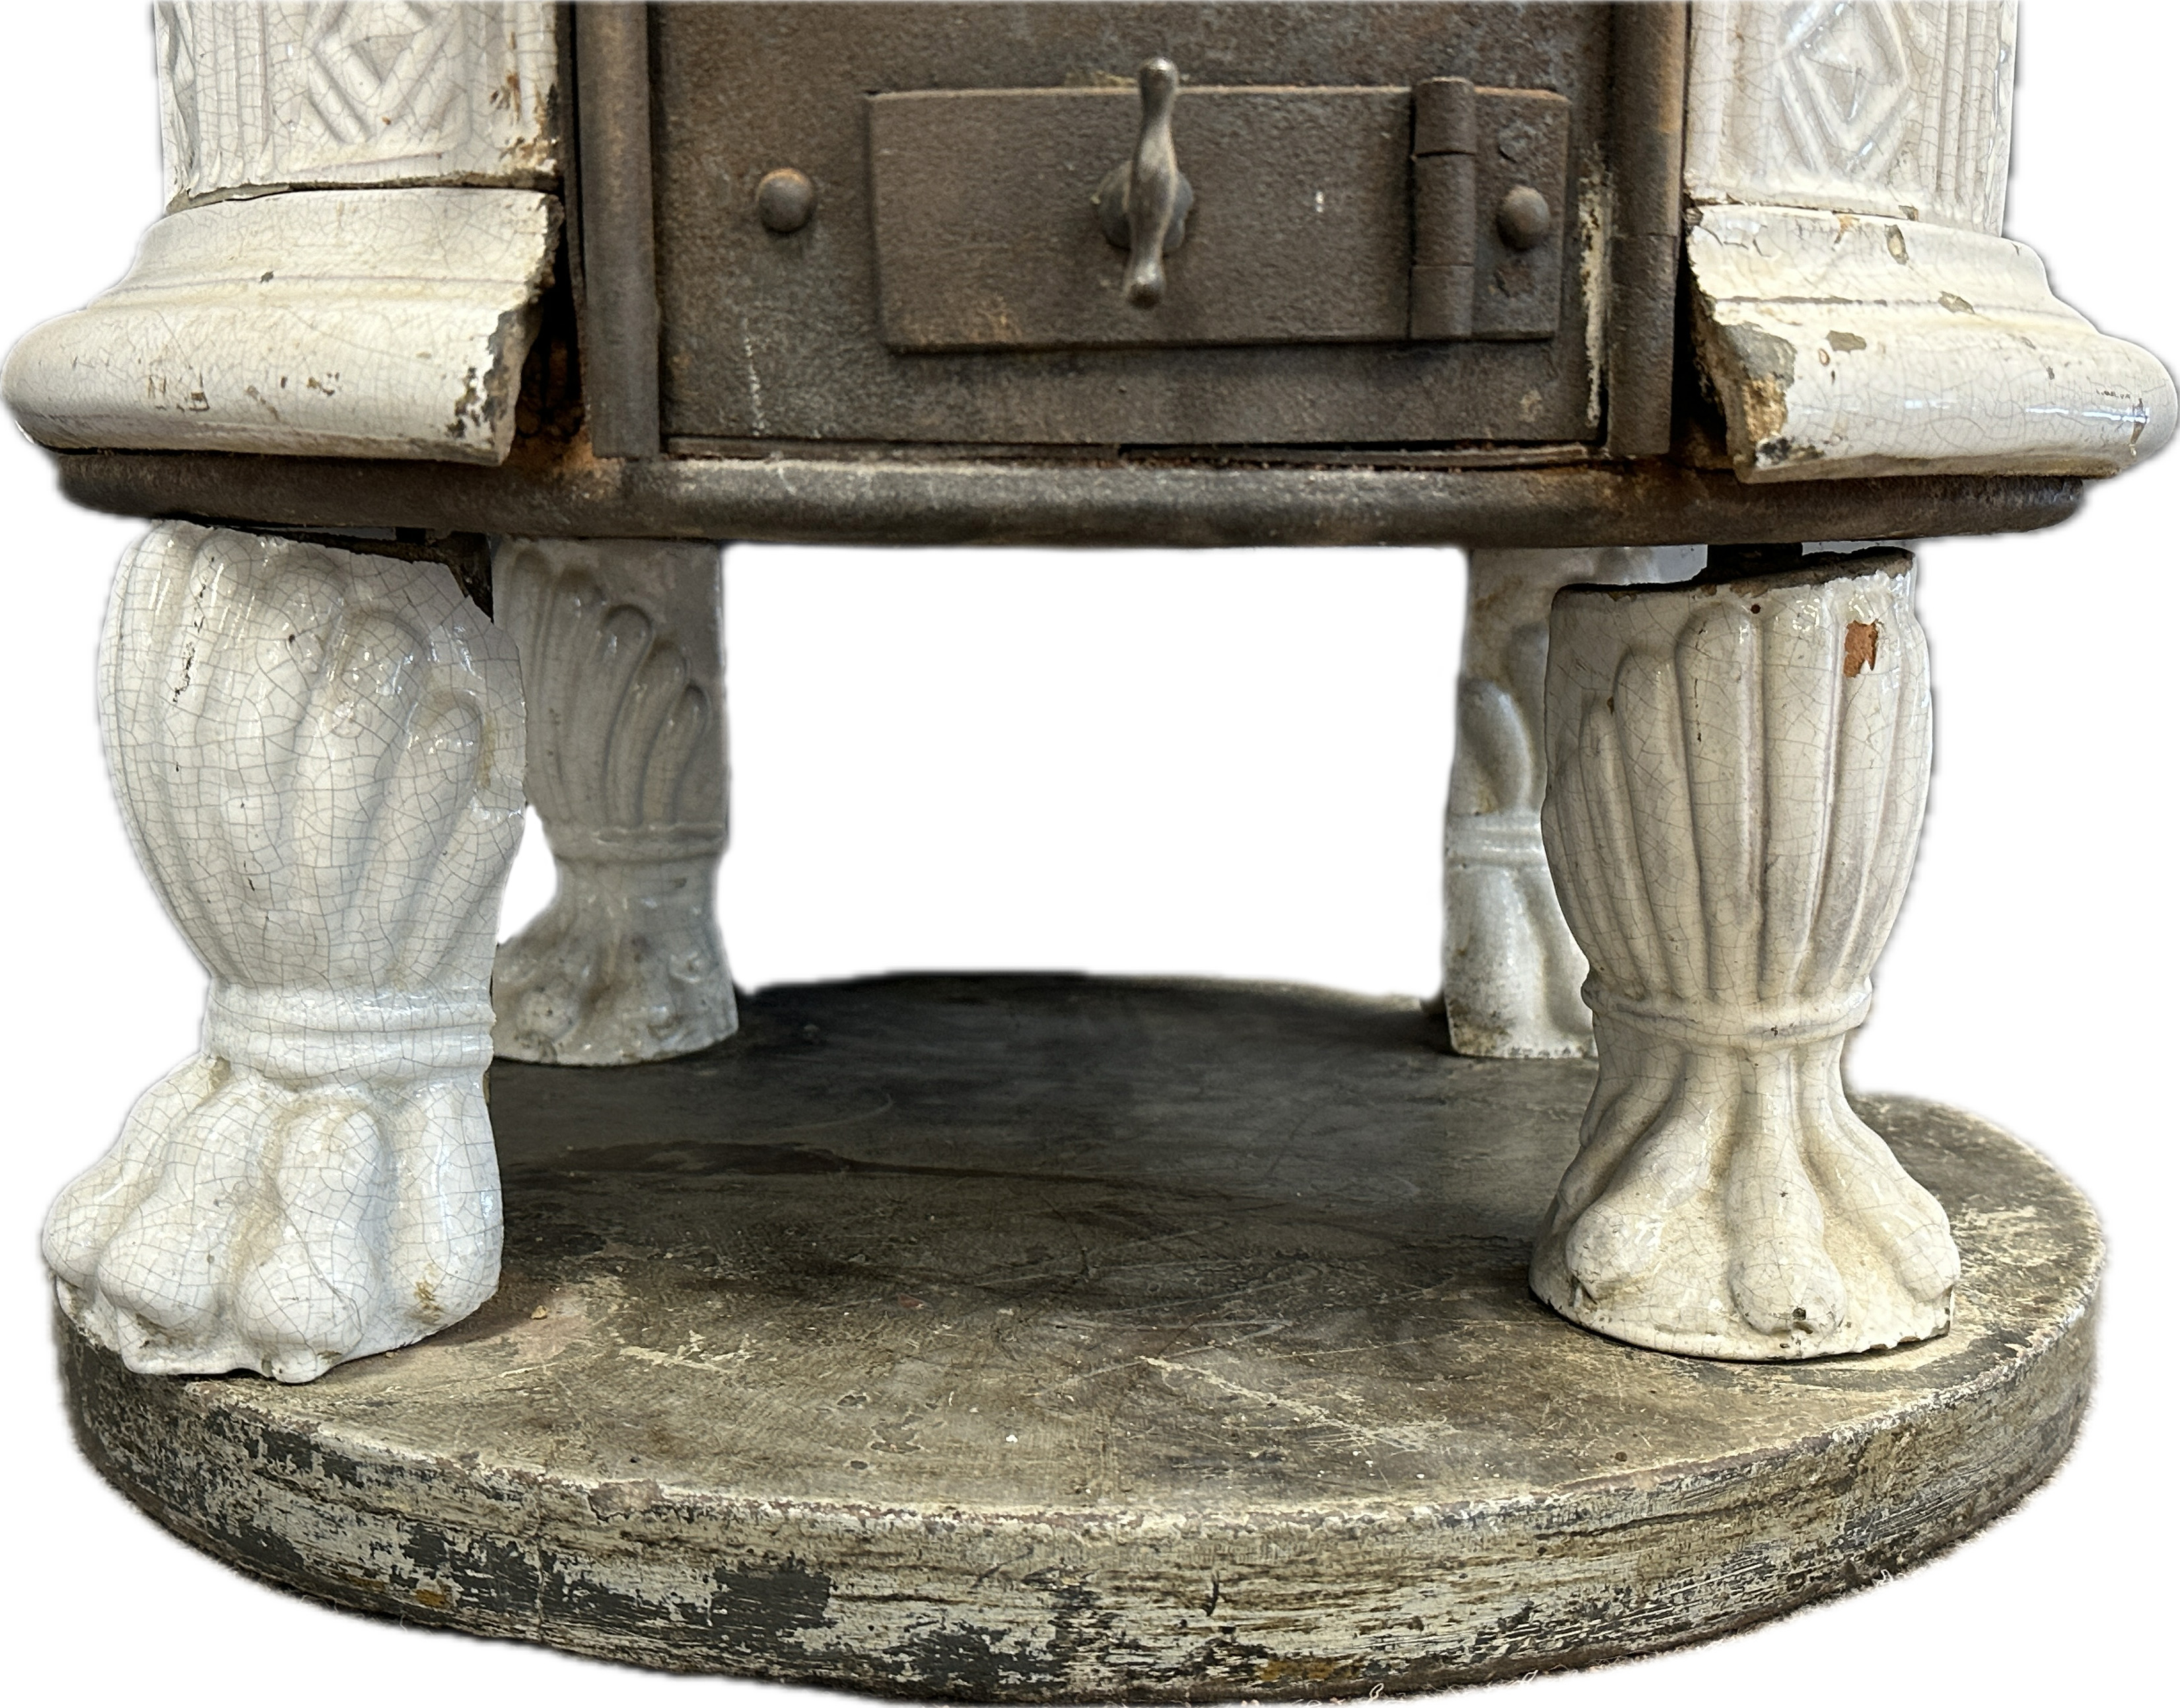 White Biedermeier round stove with tiles in relief structure. - Image 10 of 19